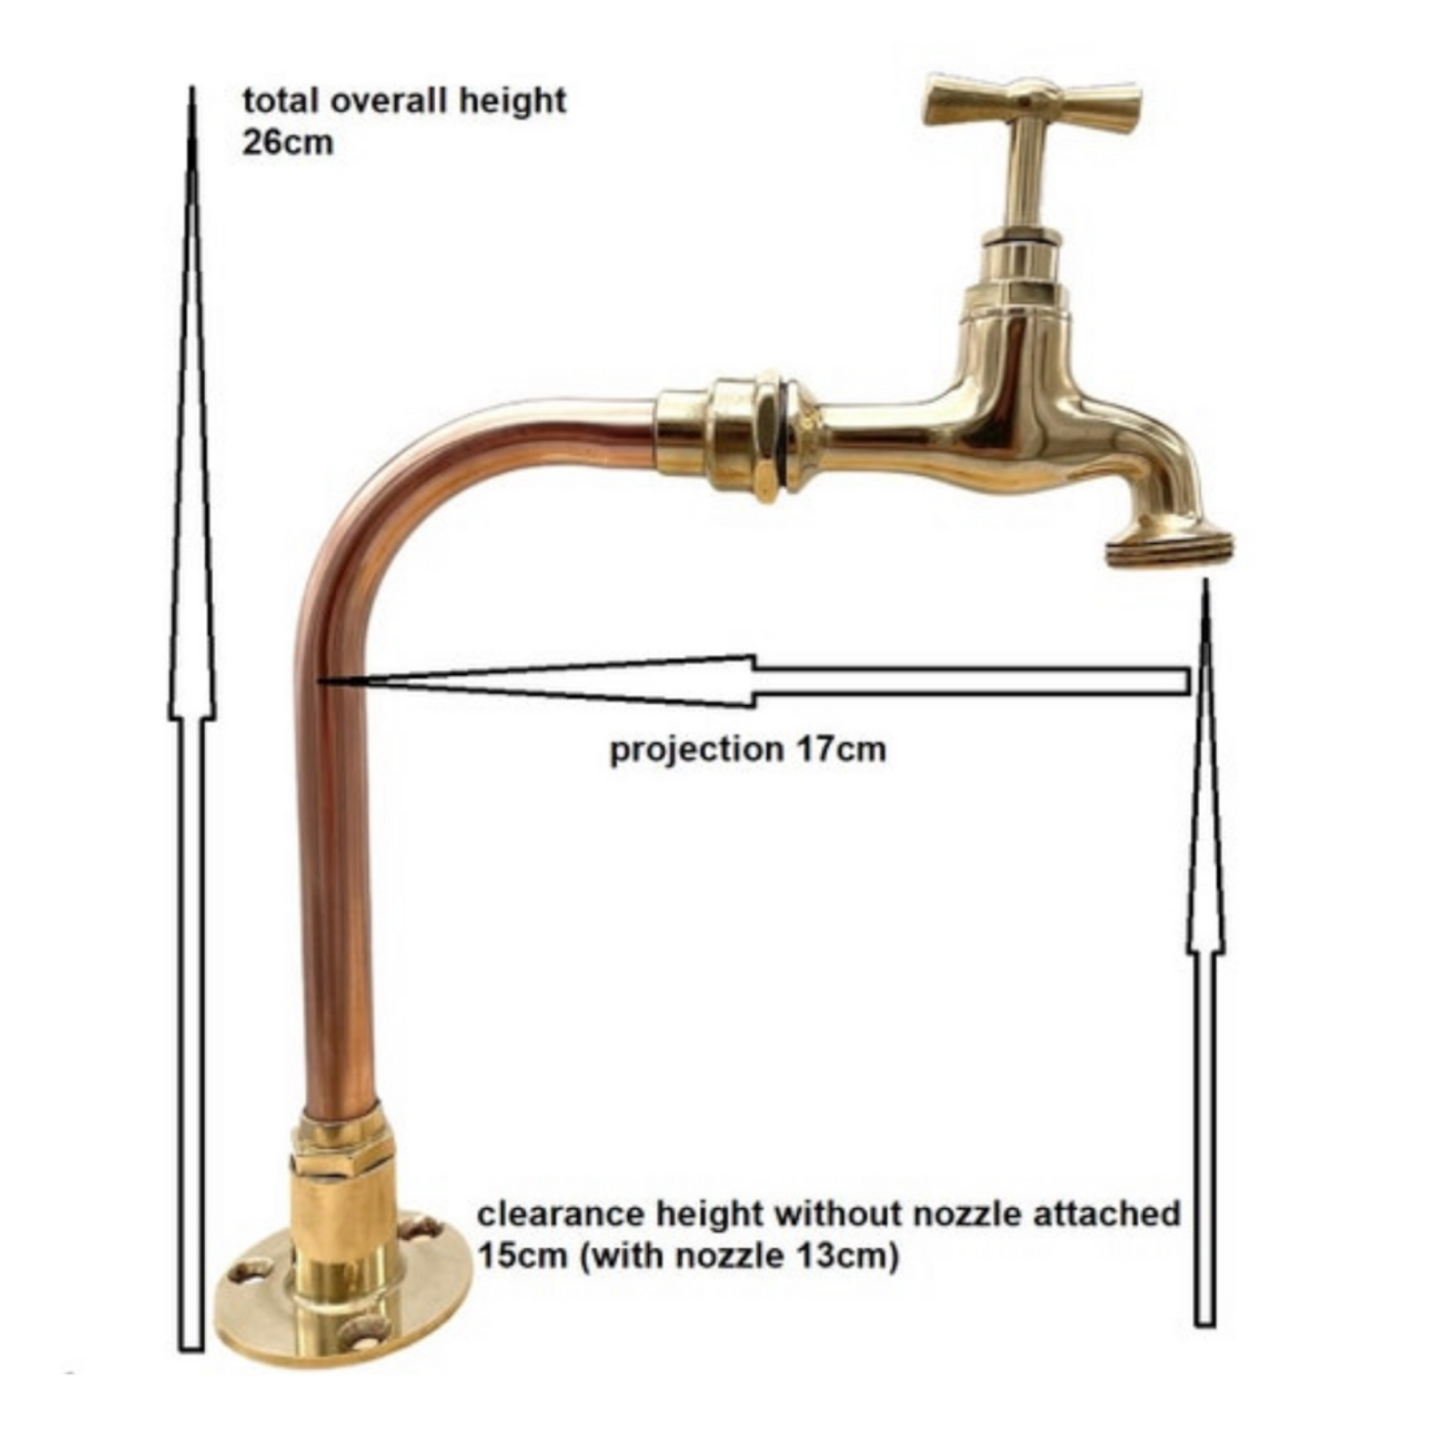 image of pair of copper and brass handmade taps measurements 